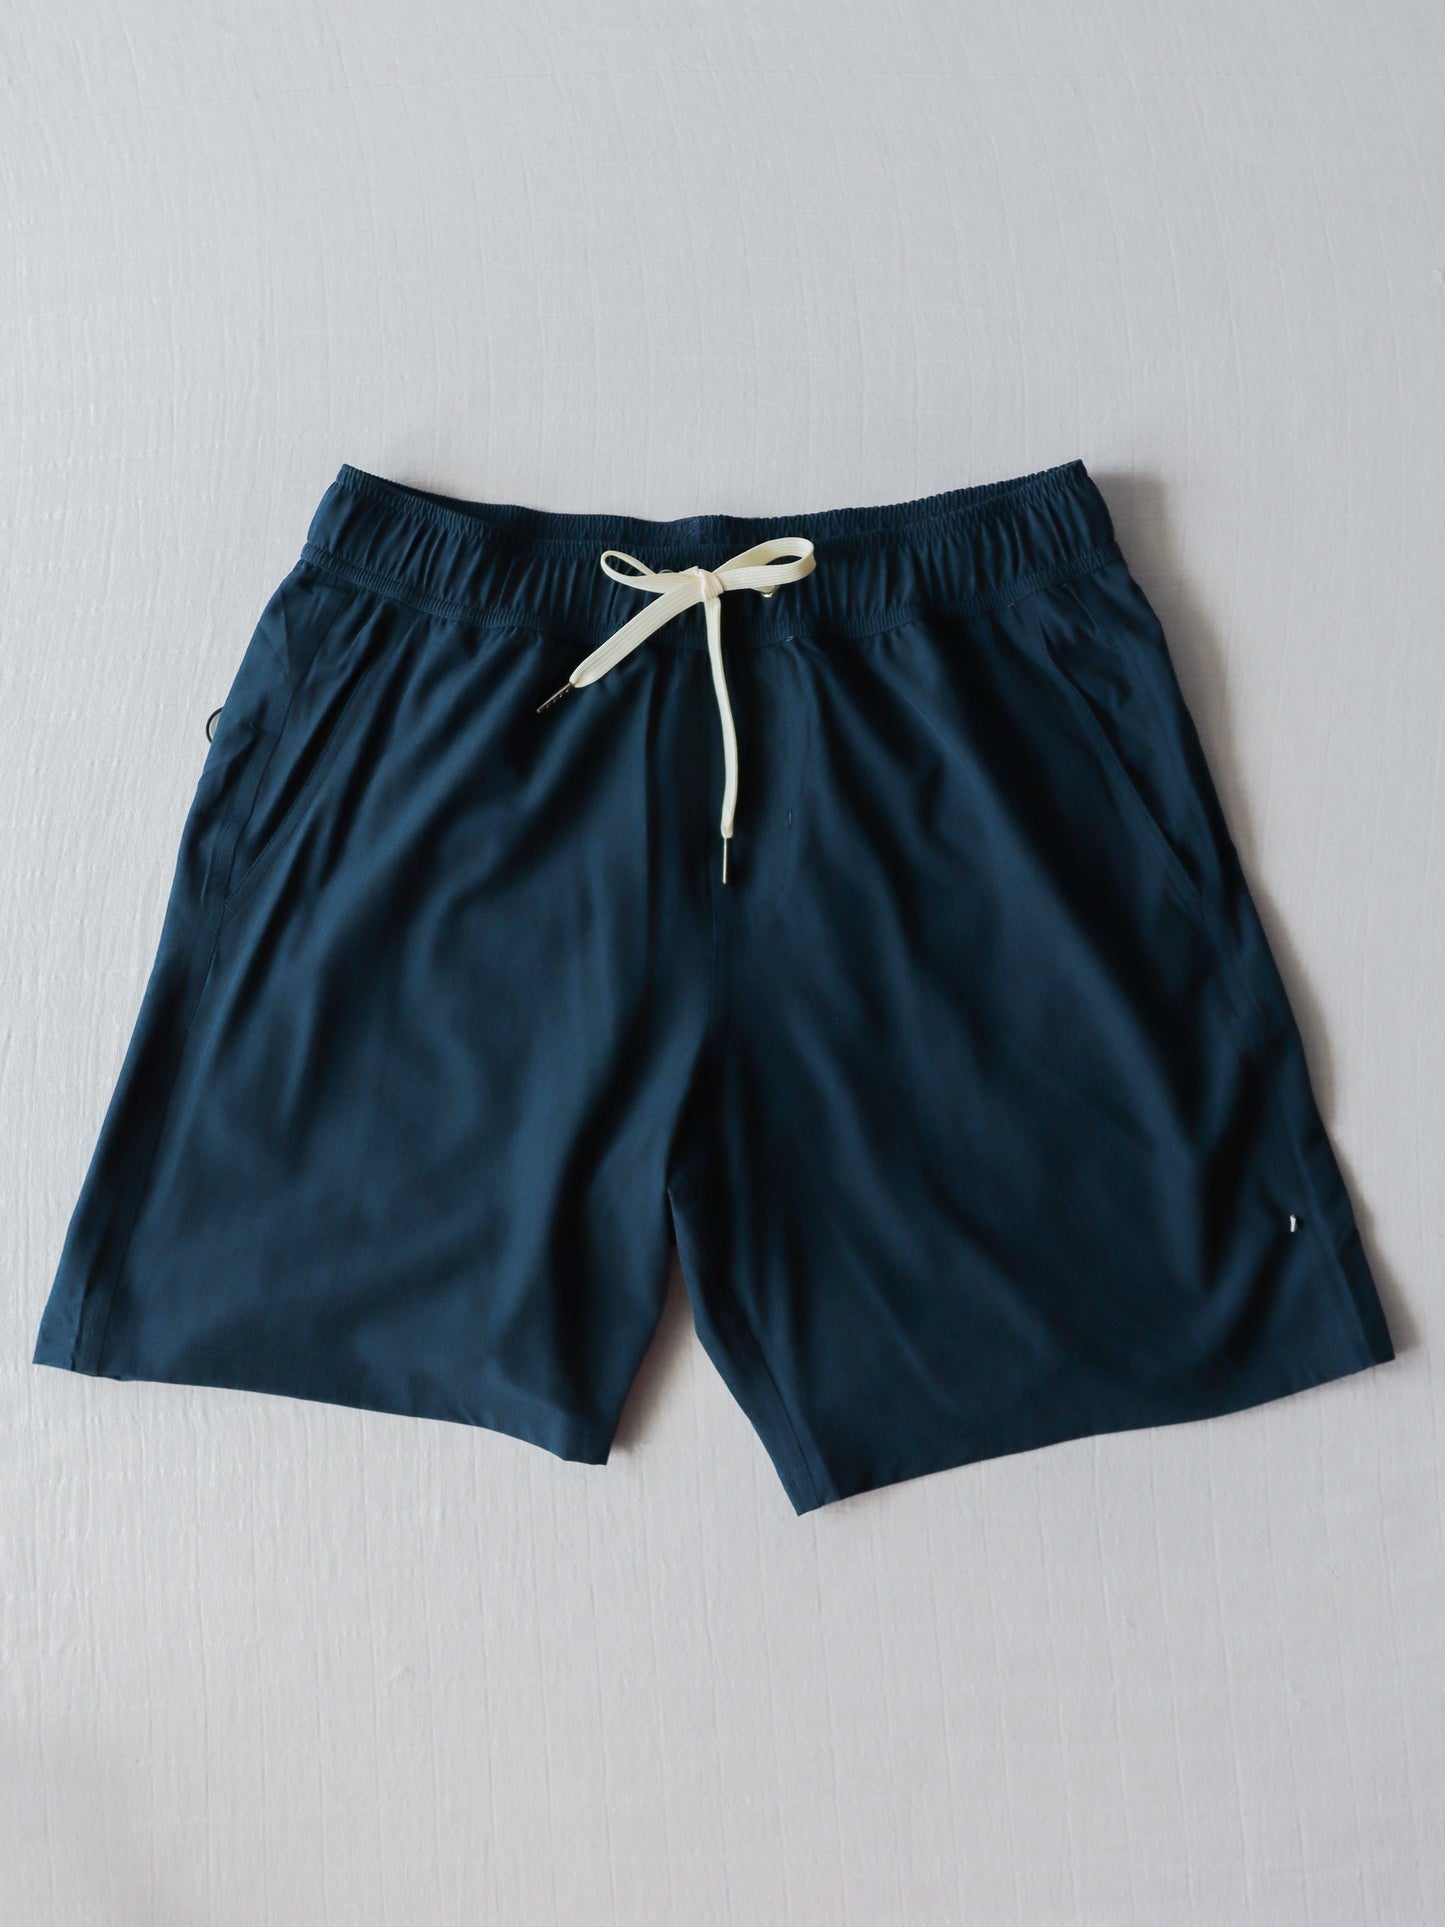 Men's Everyday Lined Trunks – Navy Solid